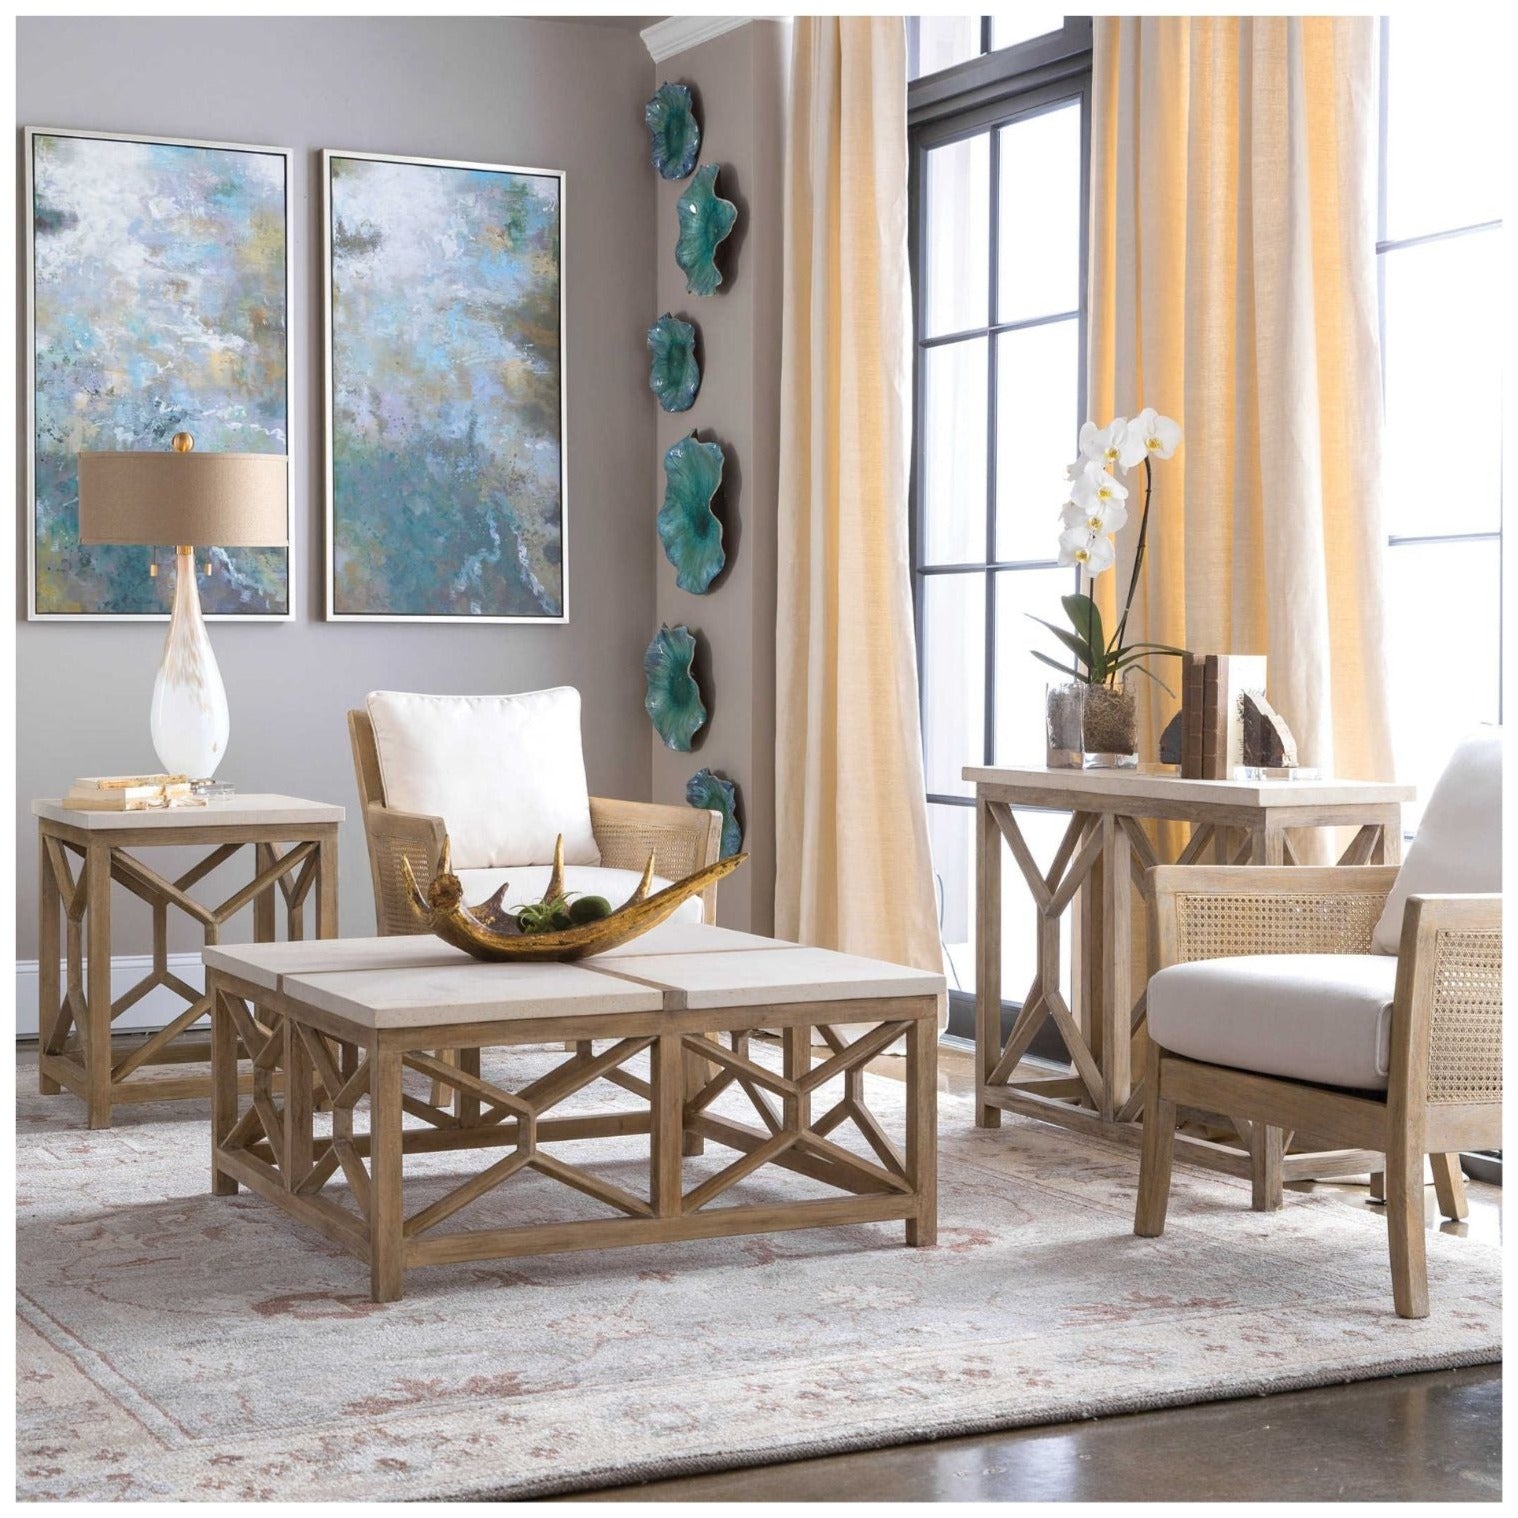 This is a room setting with featured coffee table . Background  has same style end table and console with two woven cane side chairs. Art, a lamp, wall sculptures and an orchid are in room decor.